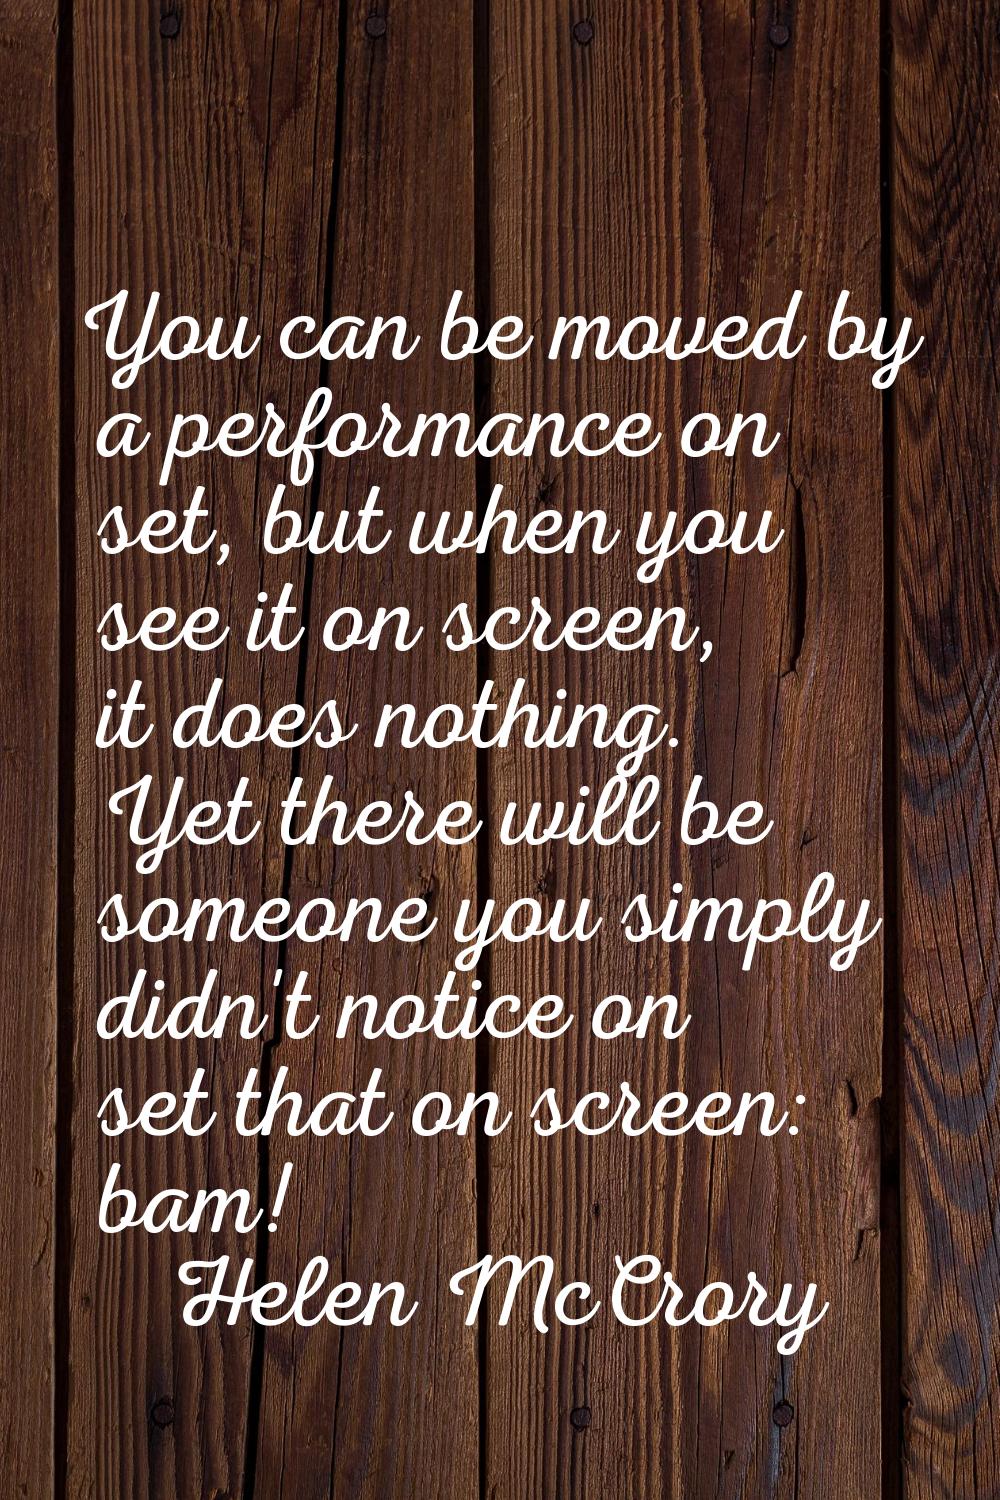 You can be moved by a performance on set, but when you see it on screen, it does nothing. Yet there